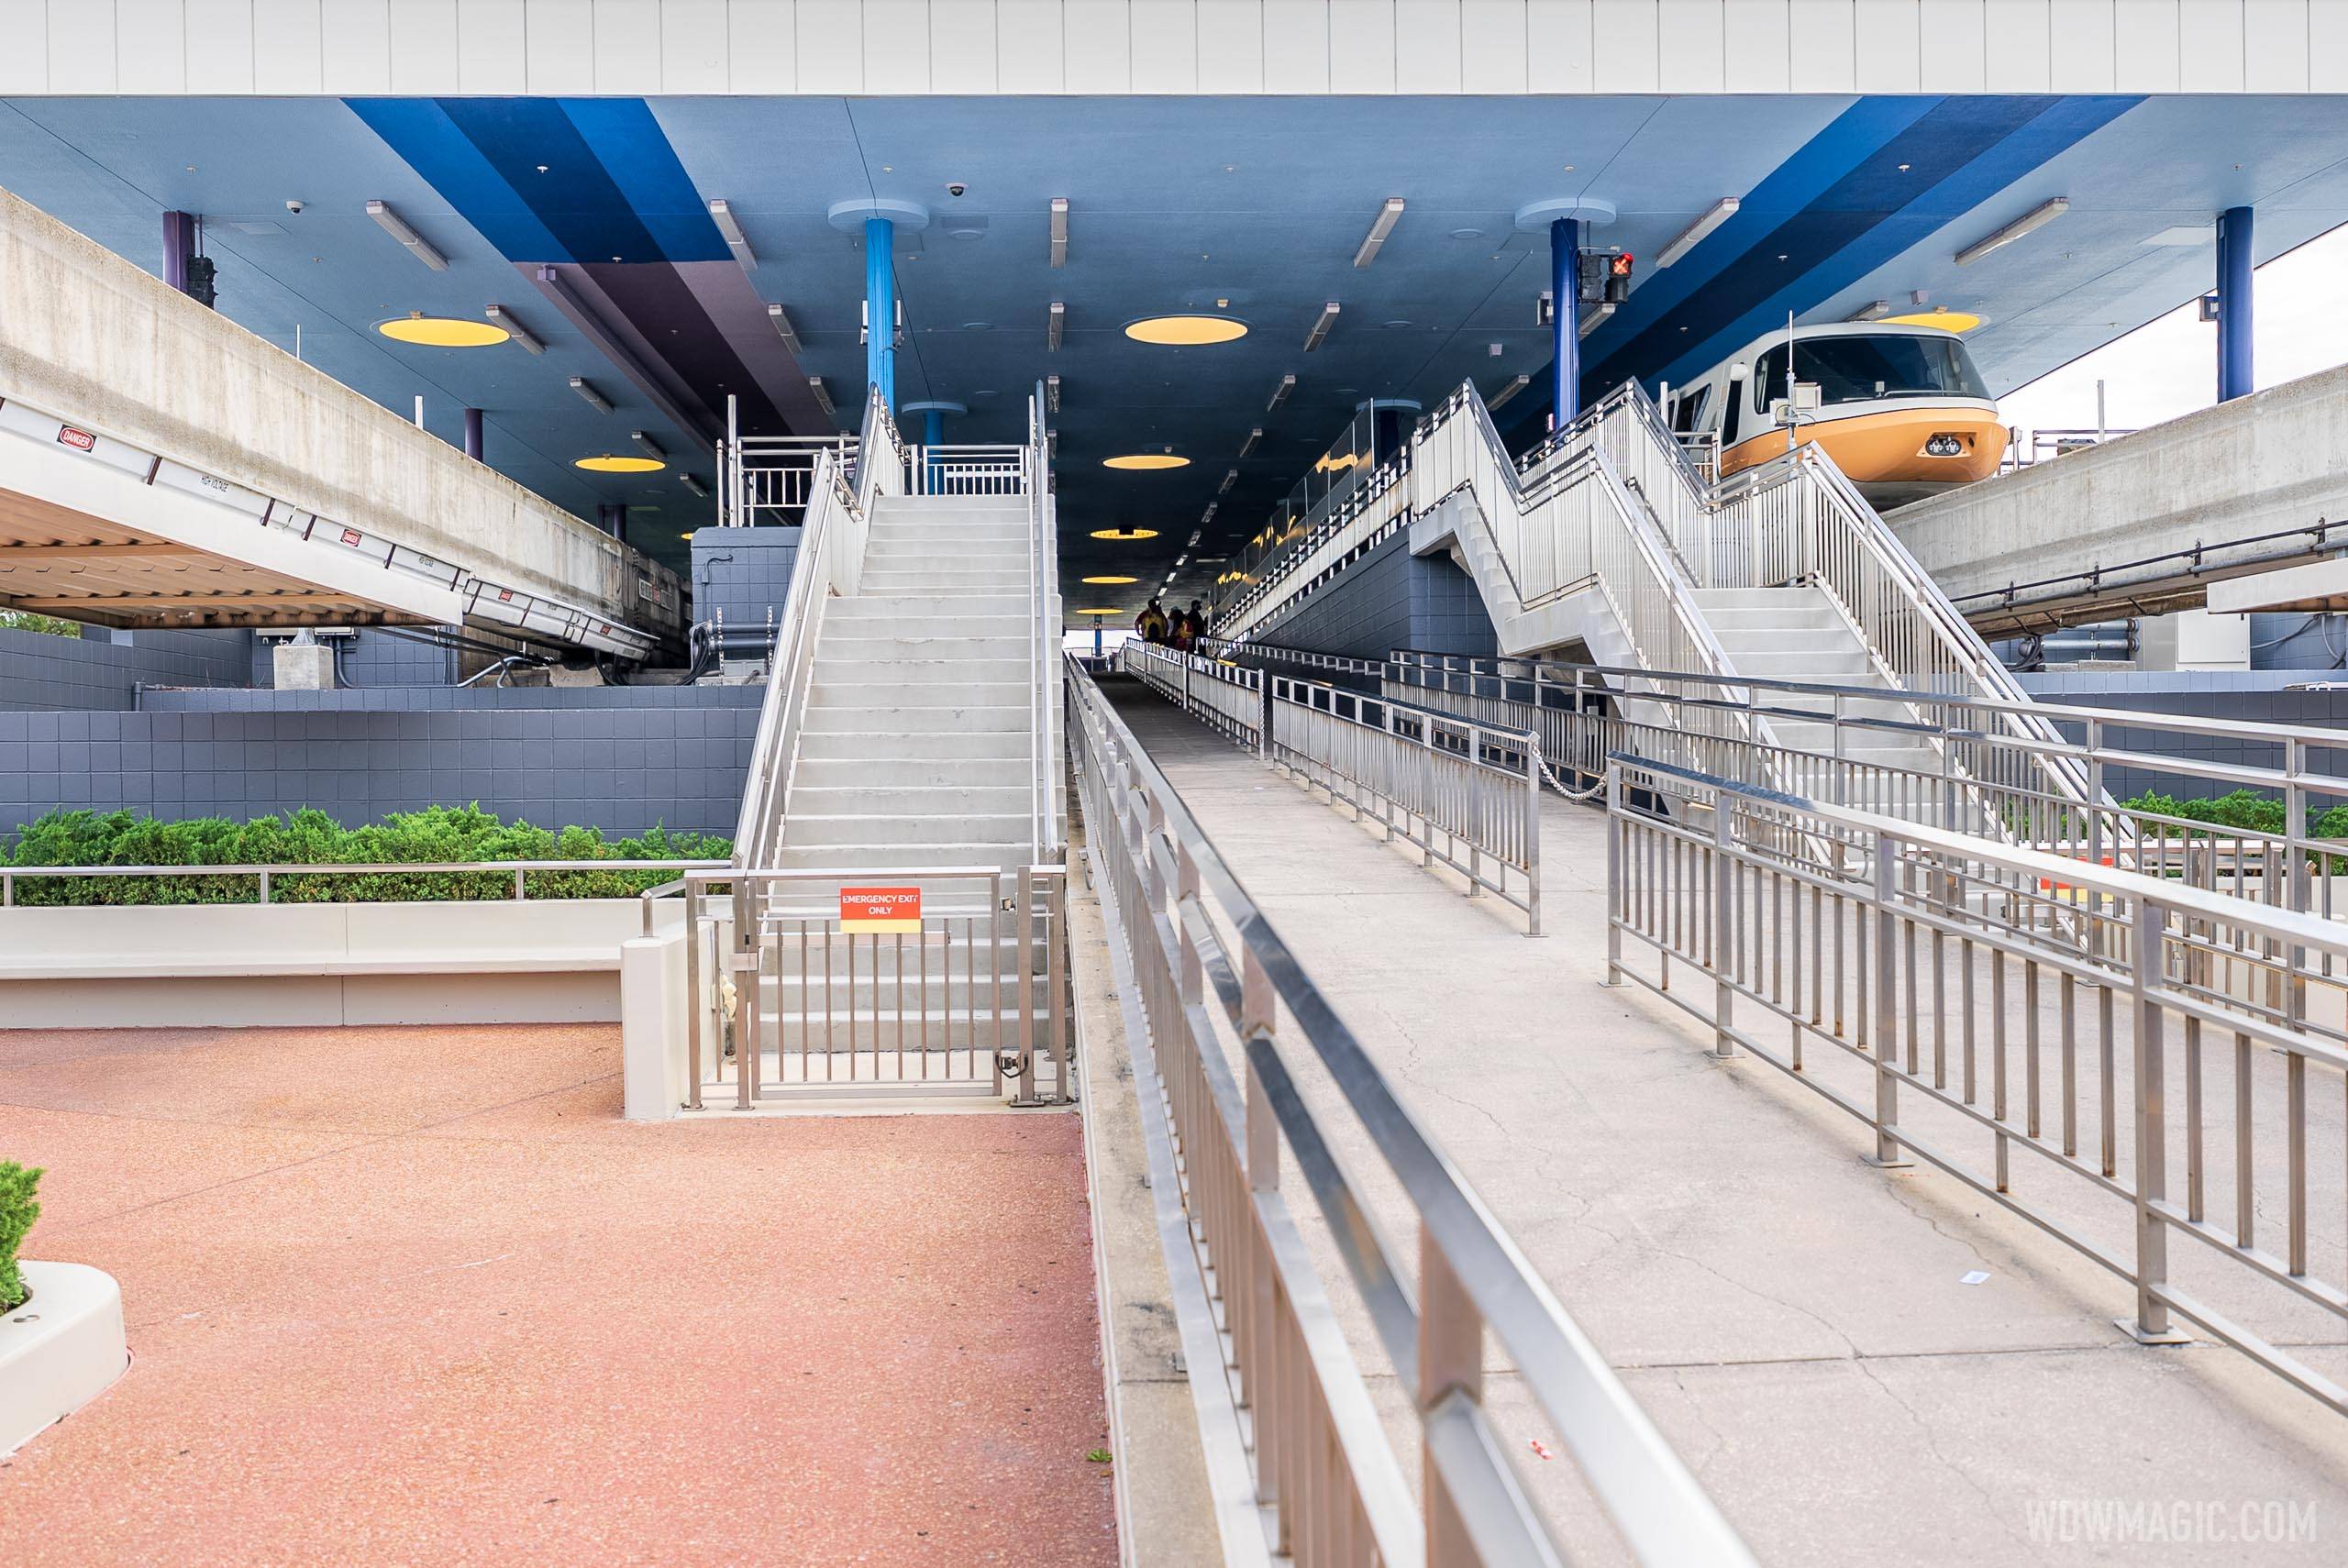 New color scheme coming to the Disney World Monorail station at the Transportation and Ticket Center